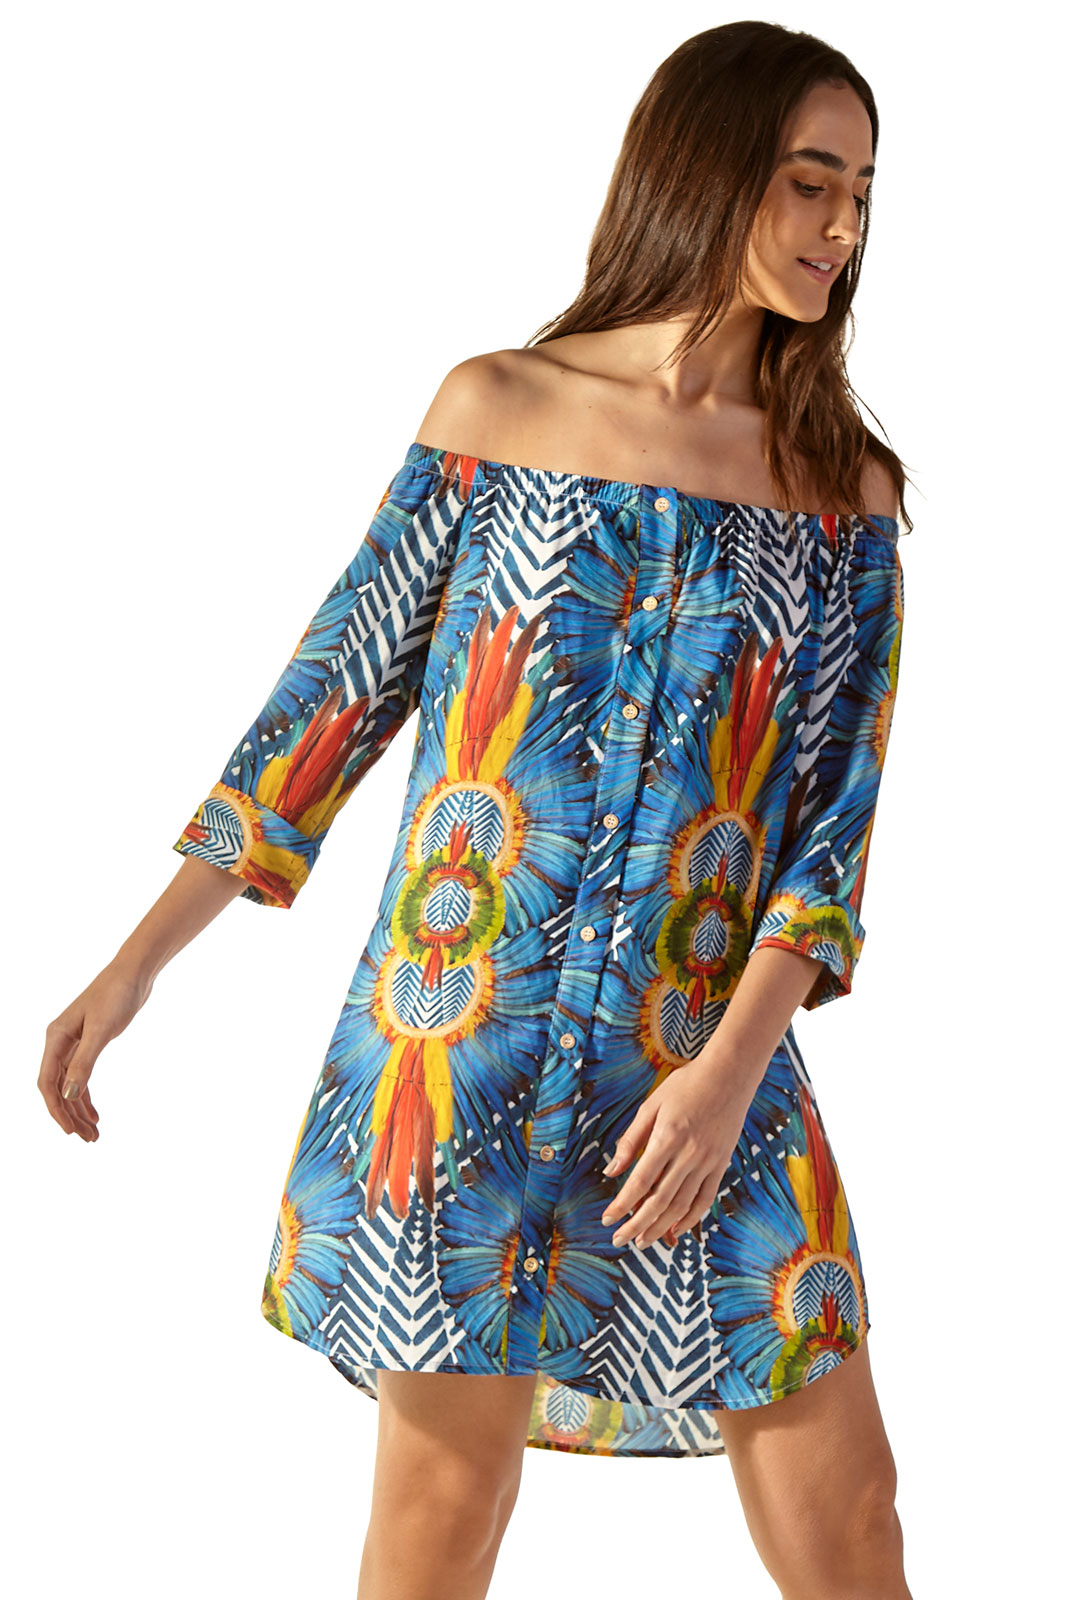 Colorful Tropical Beach Dress With Bare Shoulders - Sunny Cocarde - Blueman